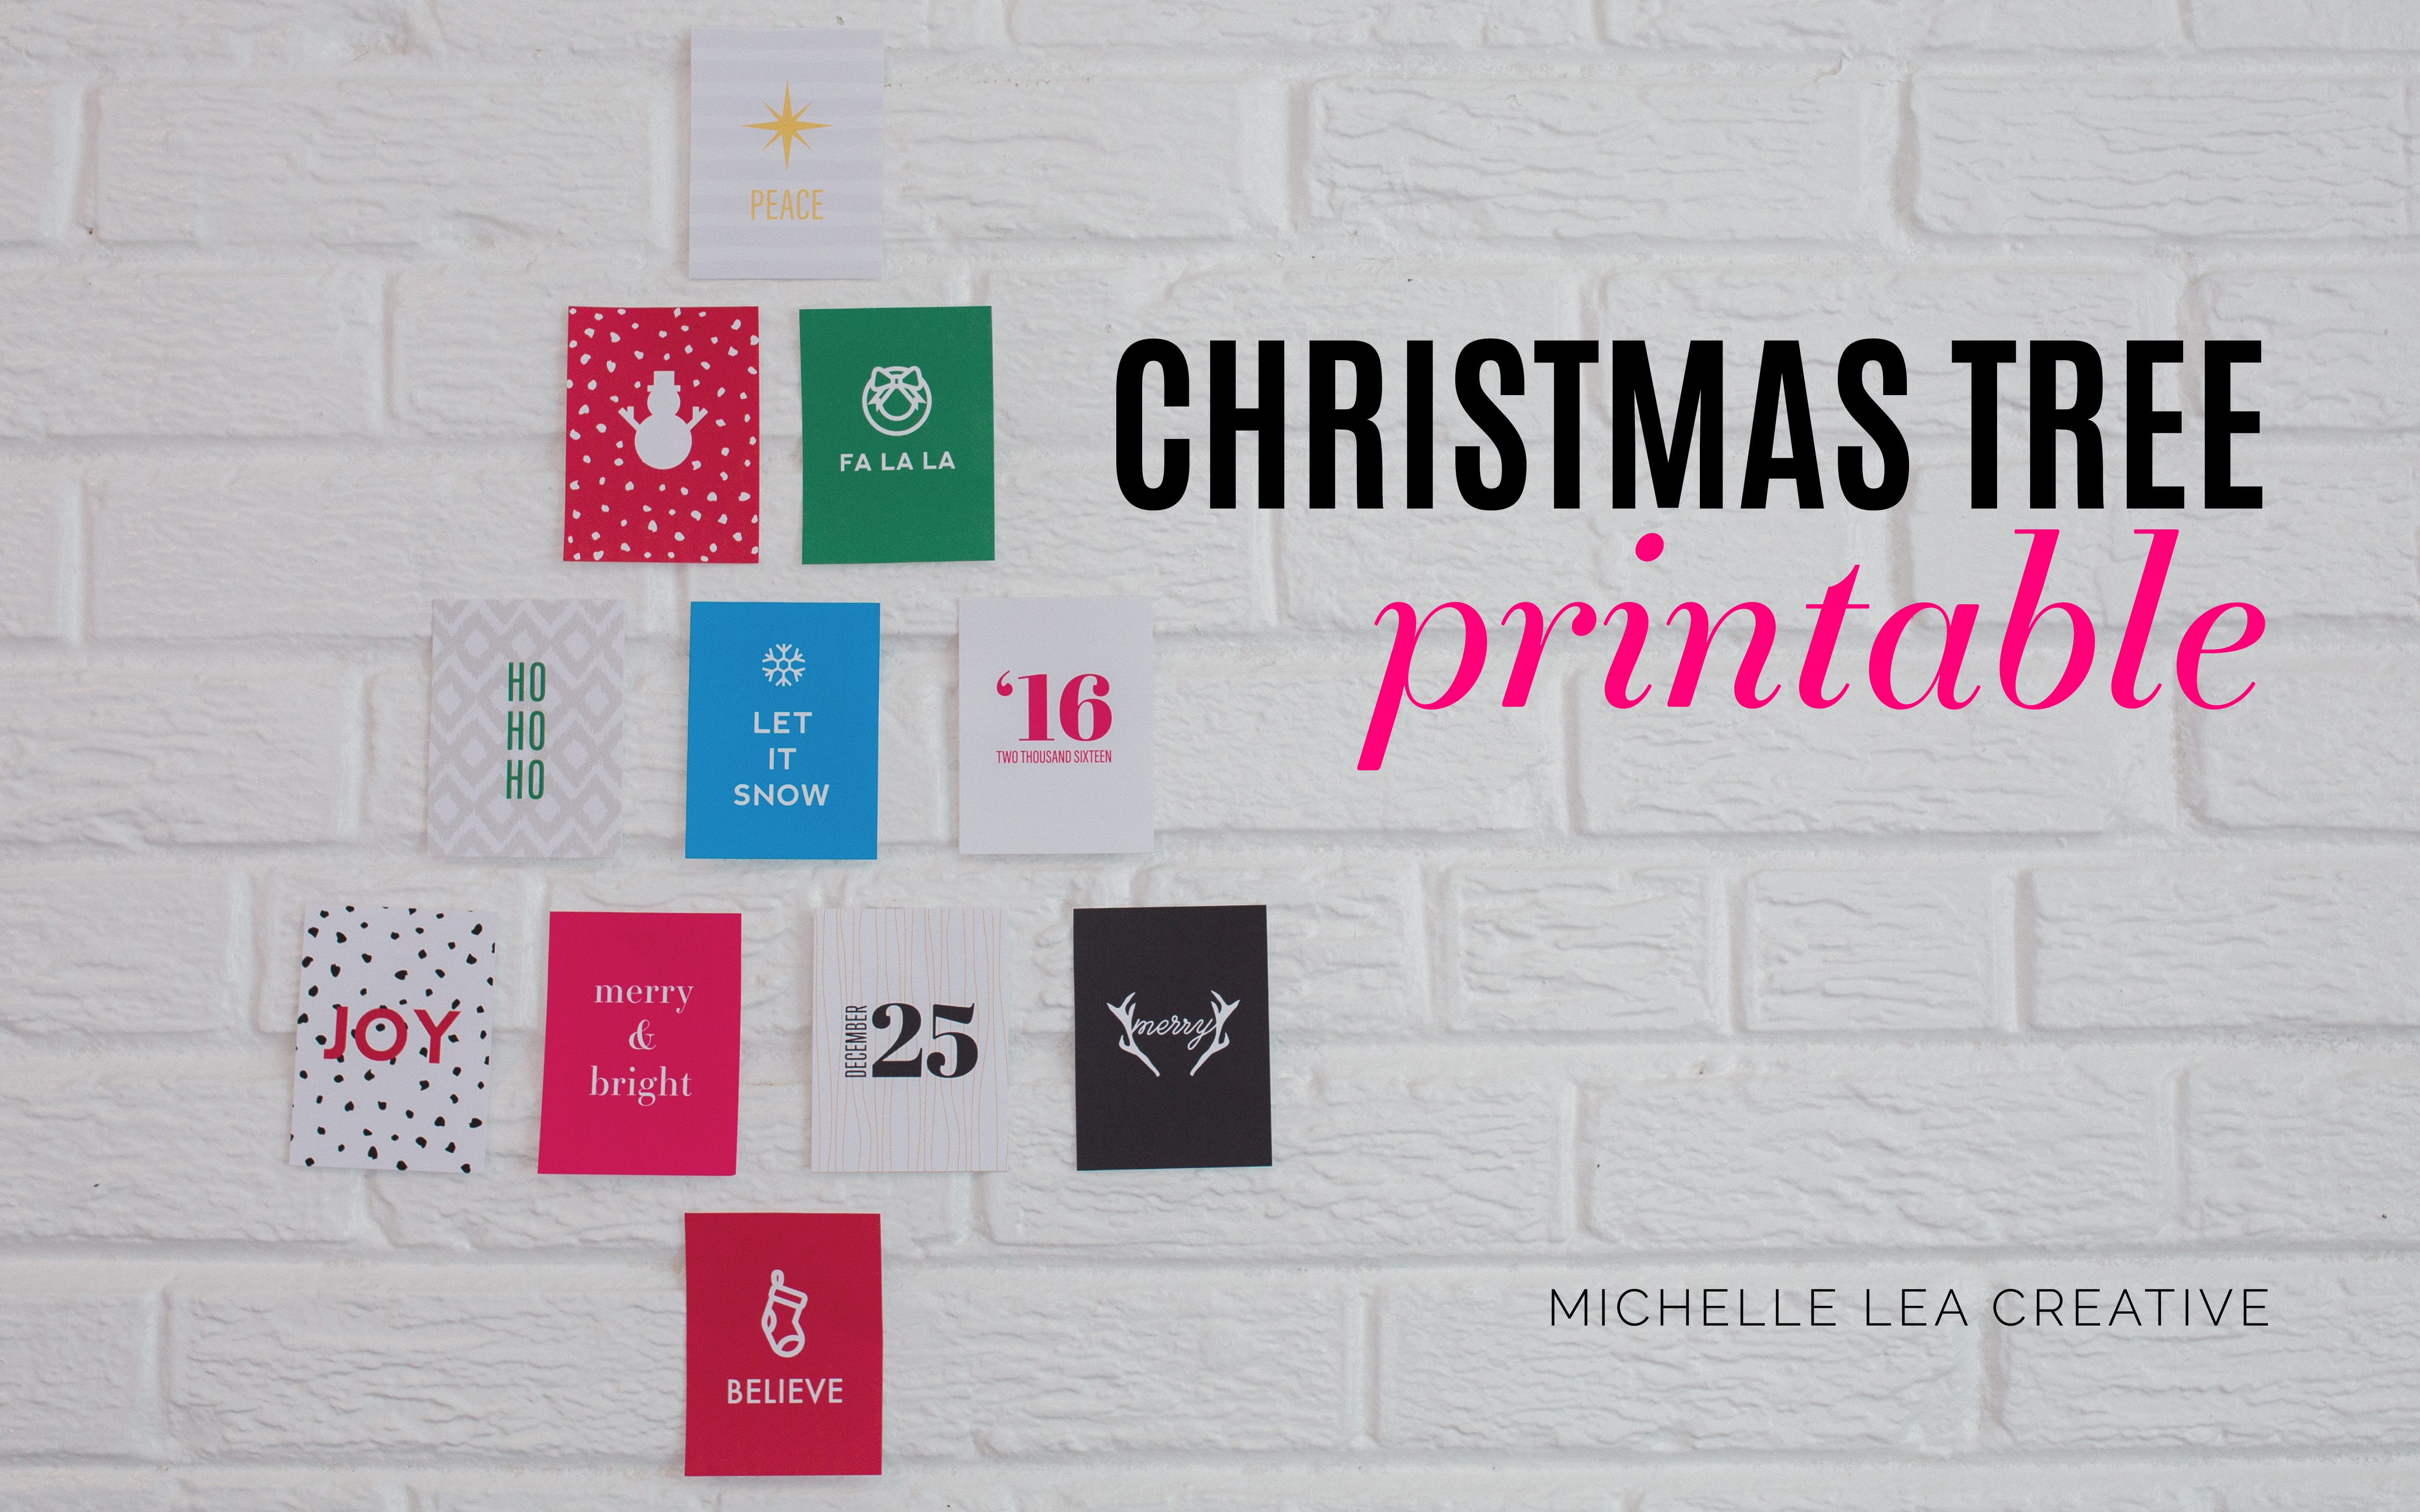 Christmas Tree Printables - A fun way to decorate in small spaces